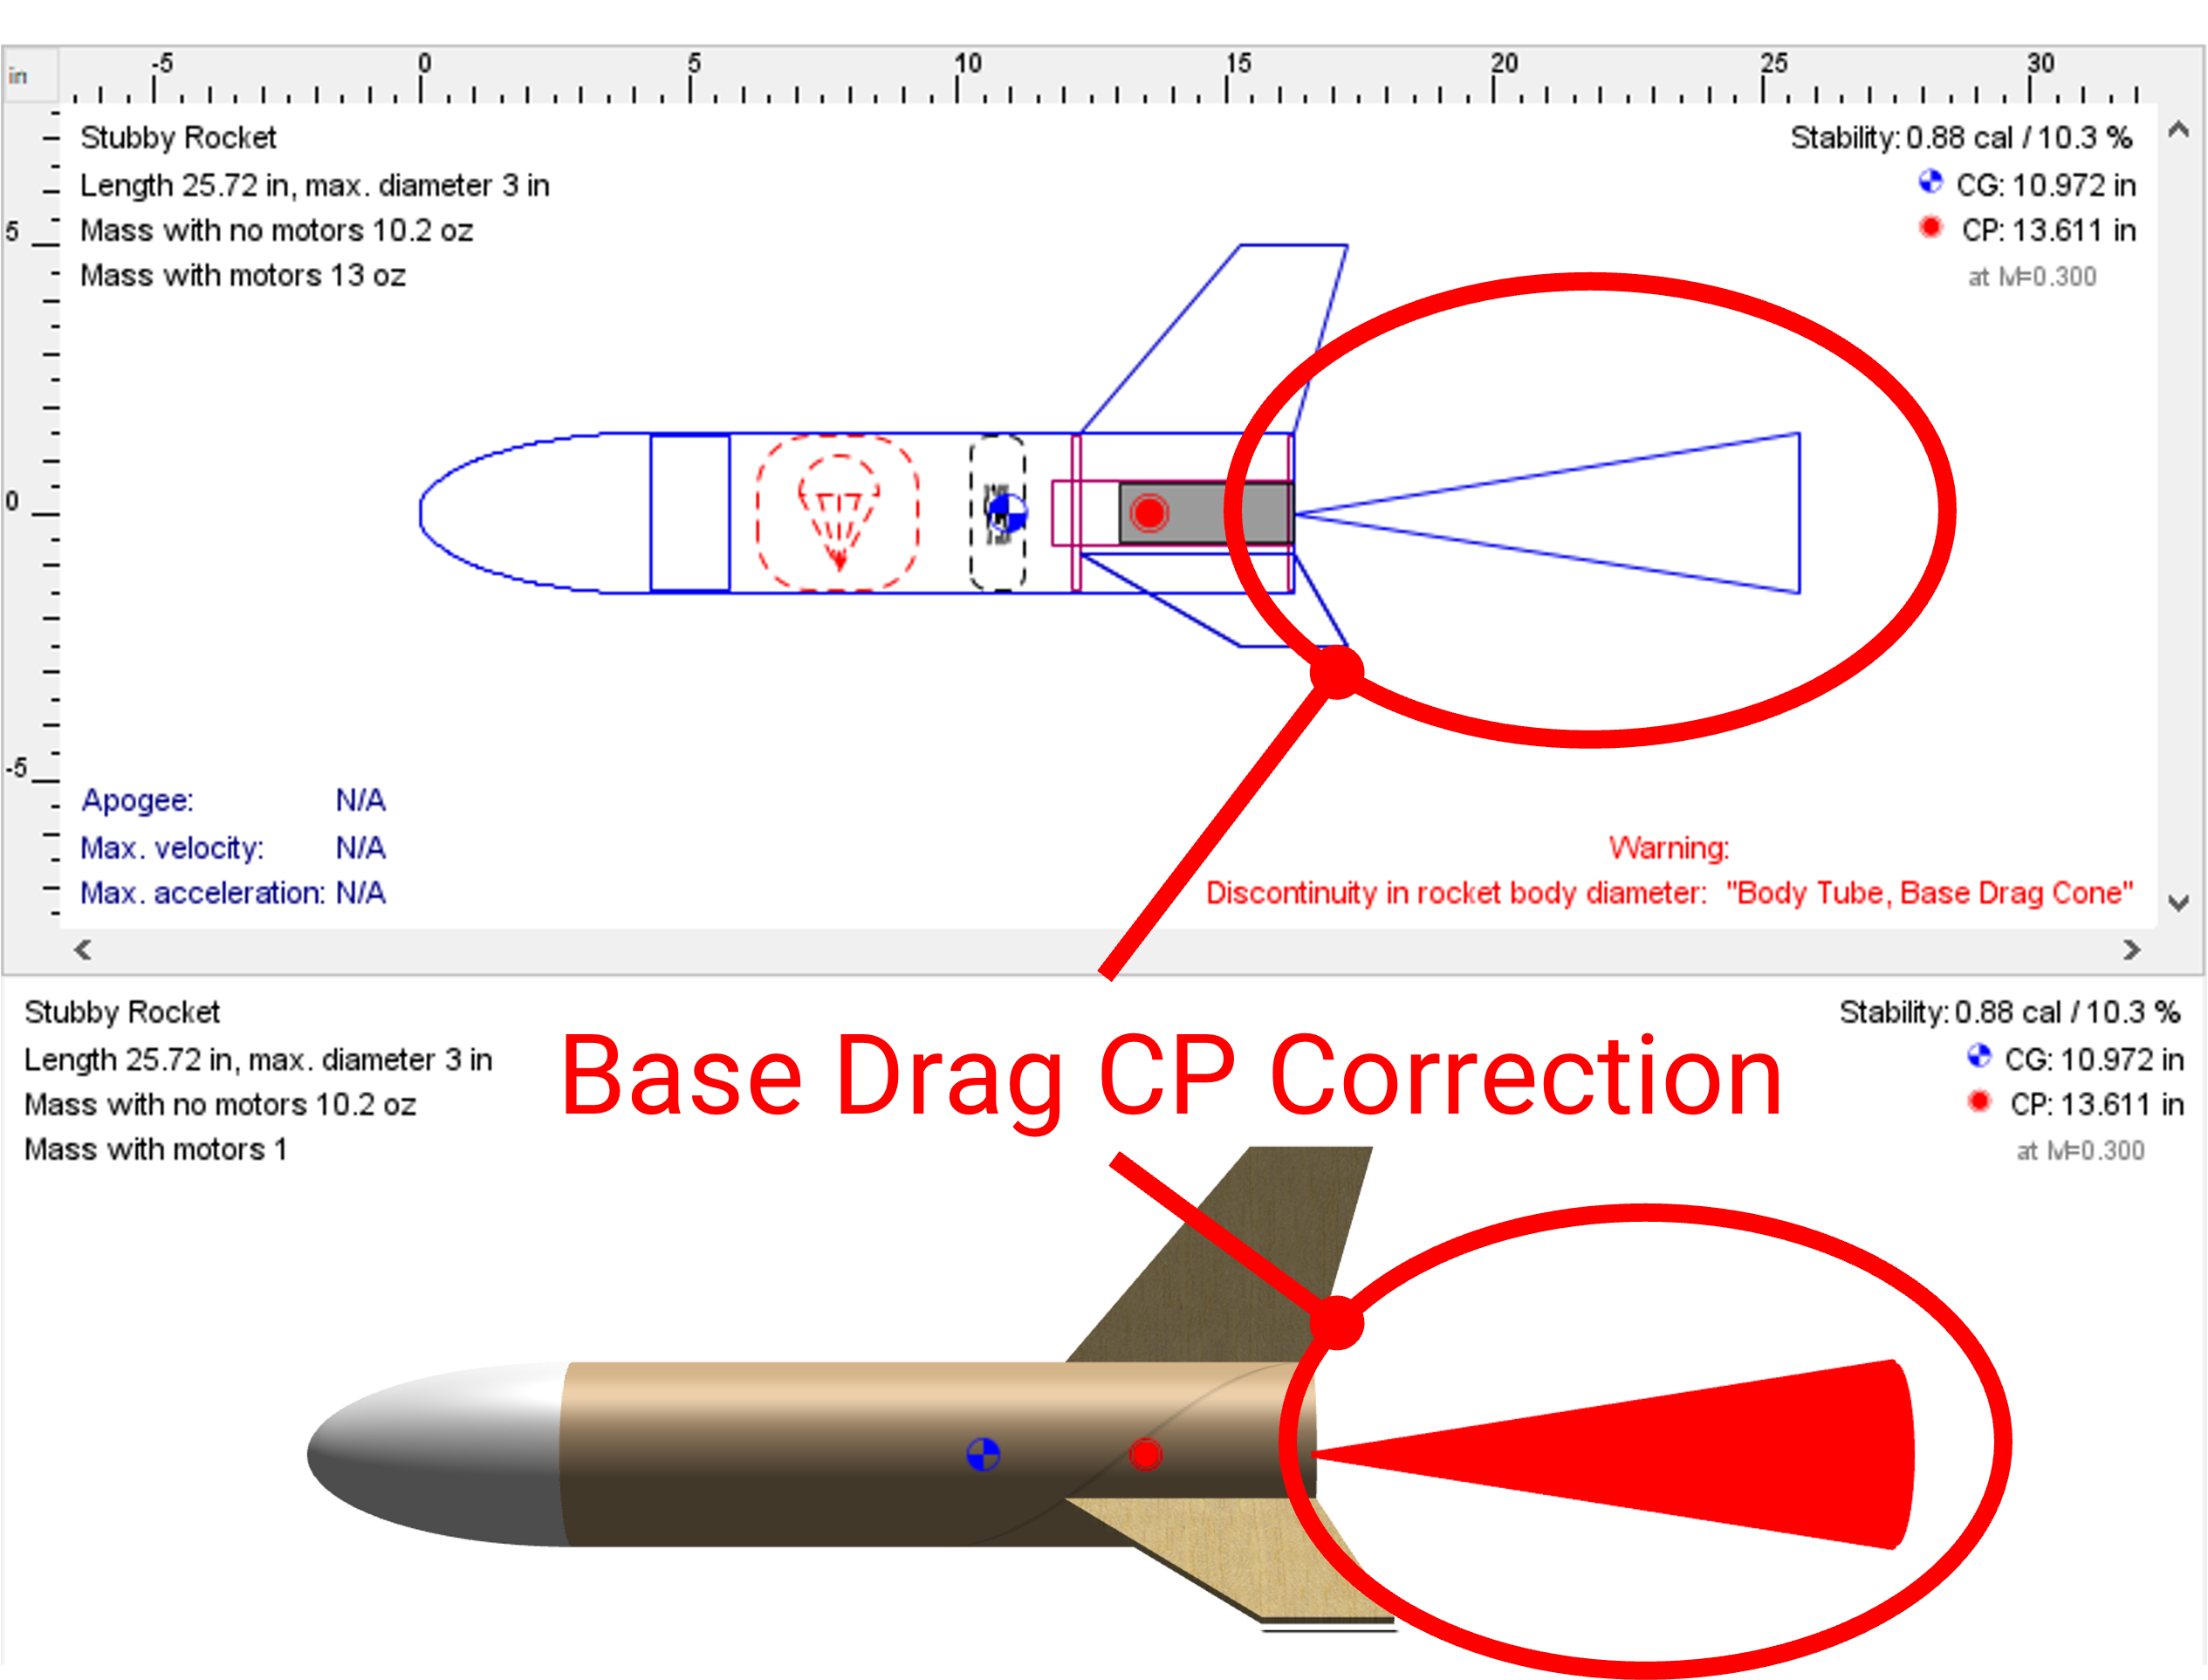 Implementing Base Drag CP Correction